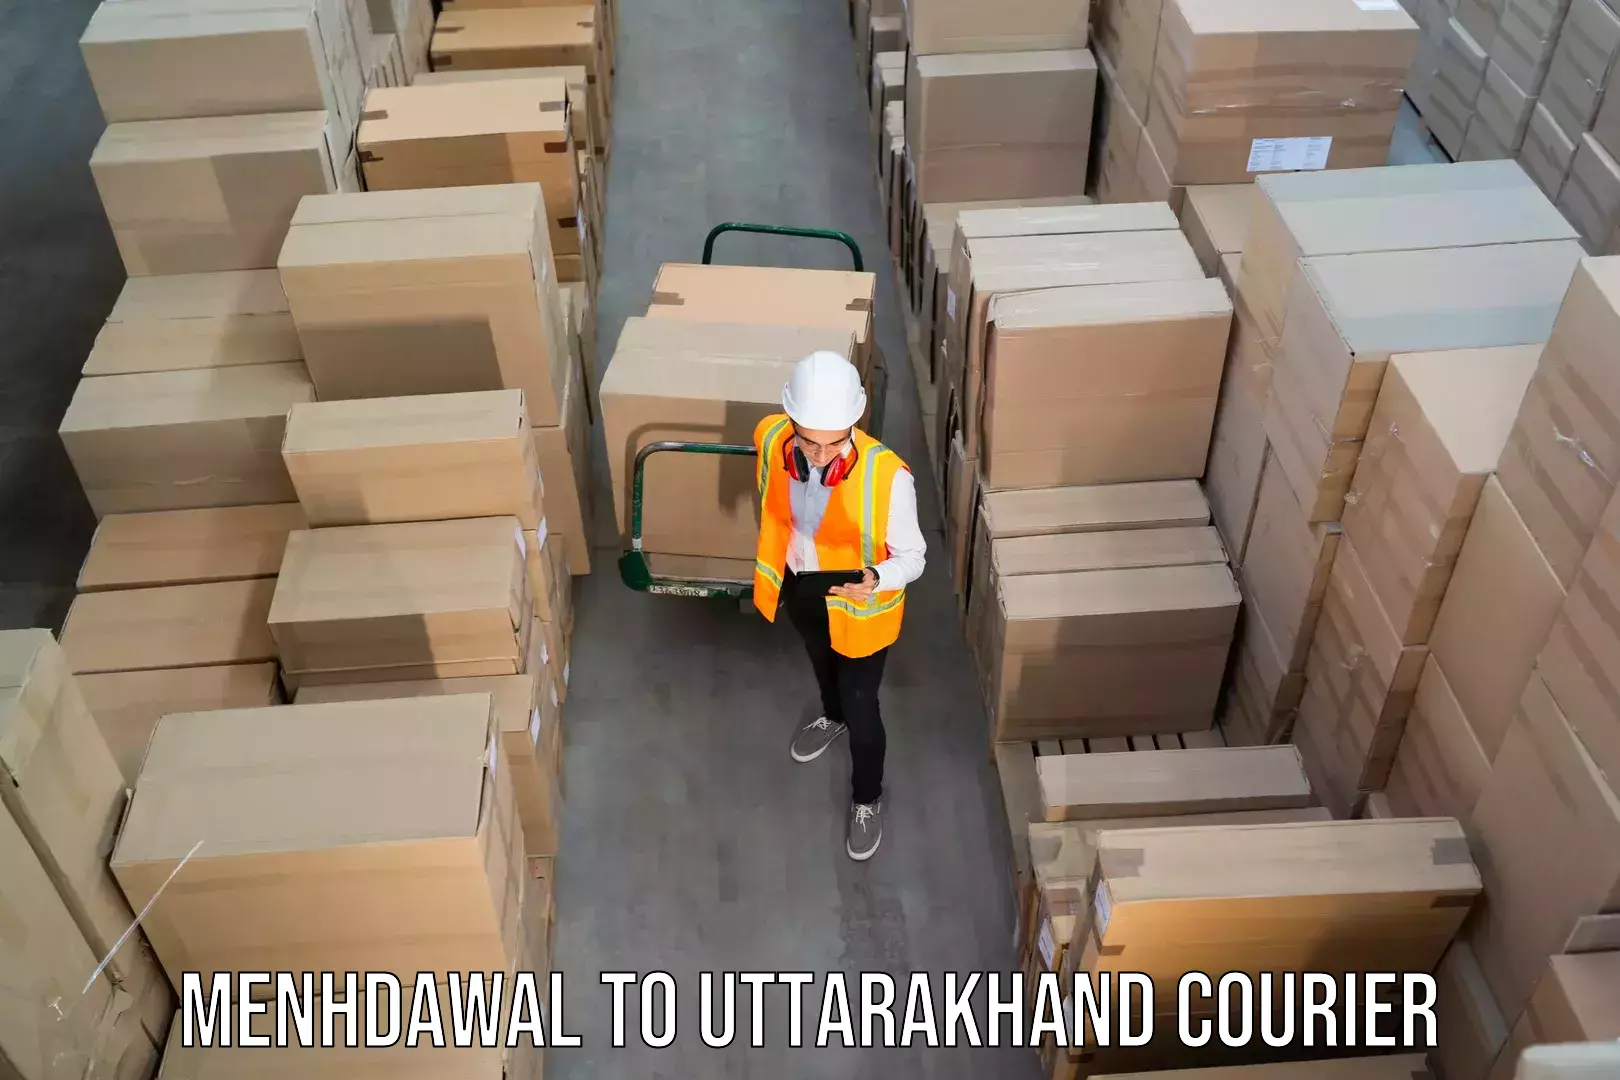 International courier networks Menhdawal to Dwarahat